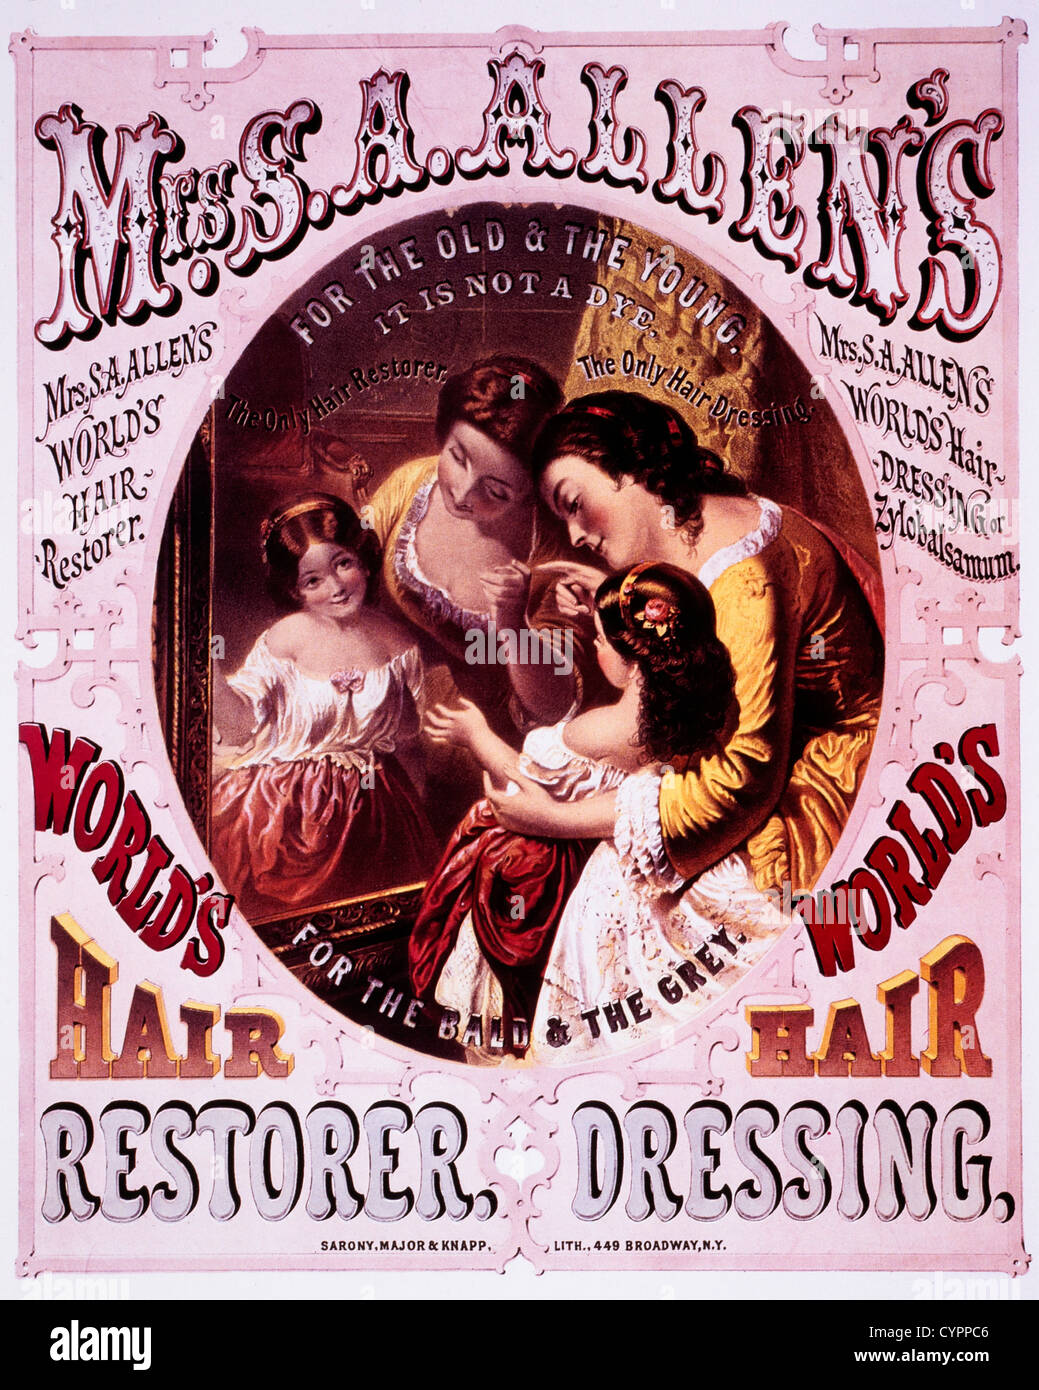 Mother and Daughter Portrait, Mrs. A. Allen's World's Hair Restorer, Hair Dressing, Trade Card, 1860 Stock Photo